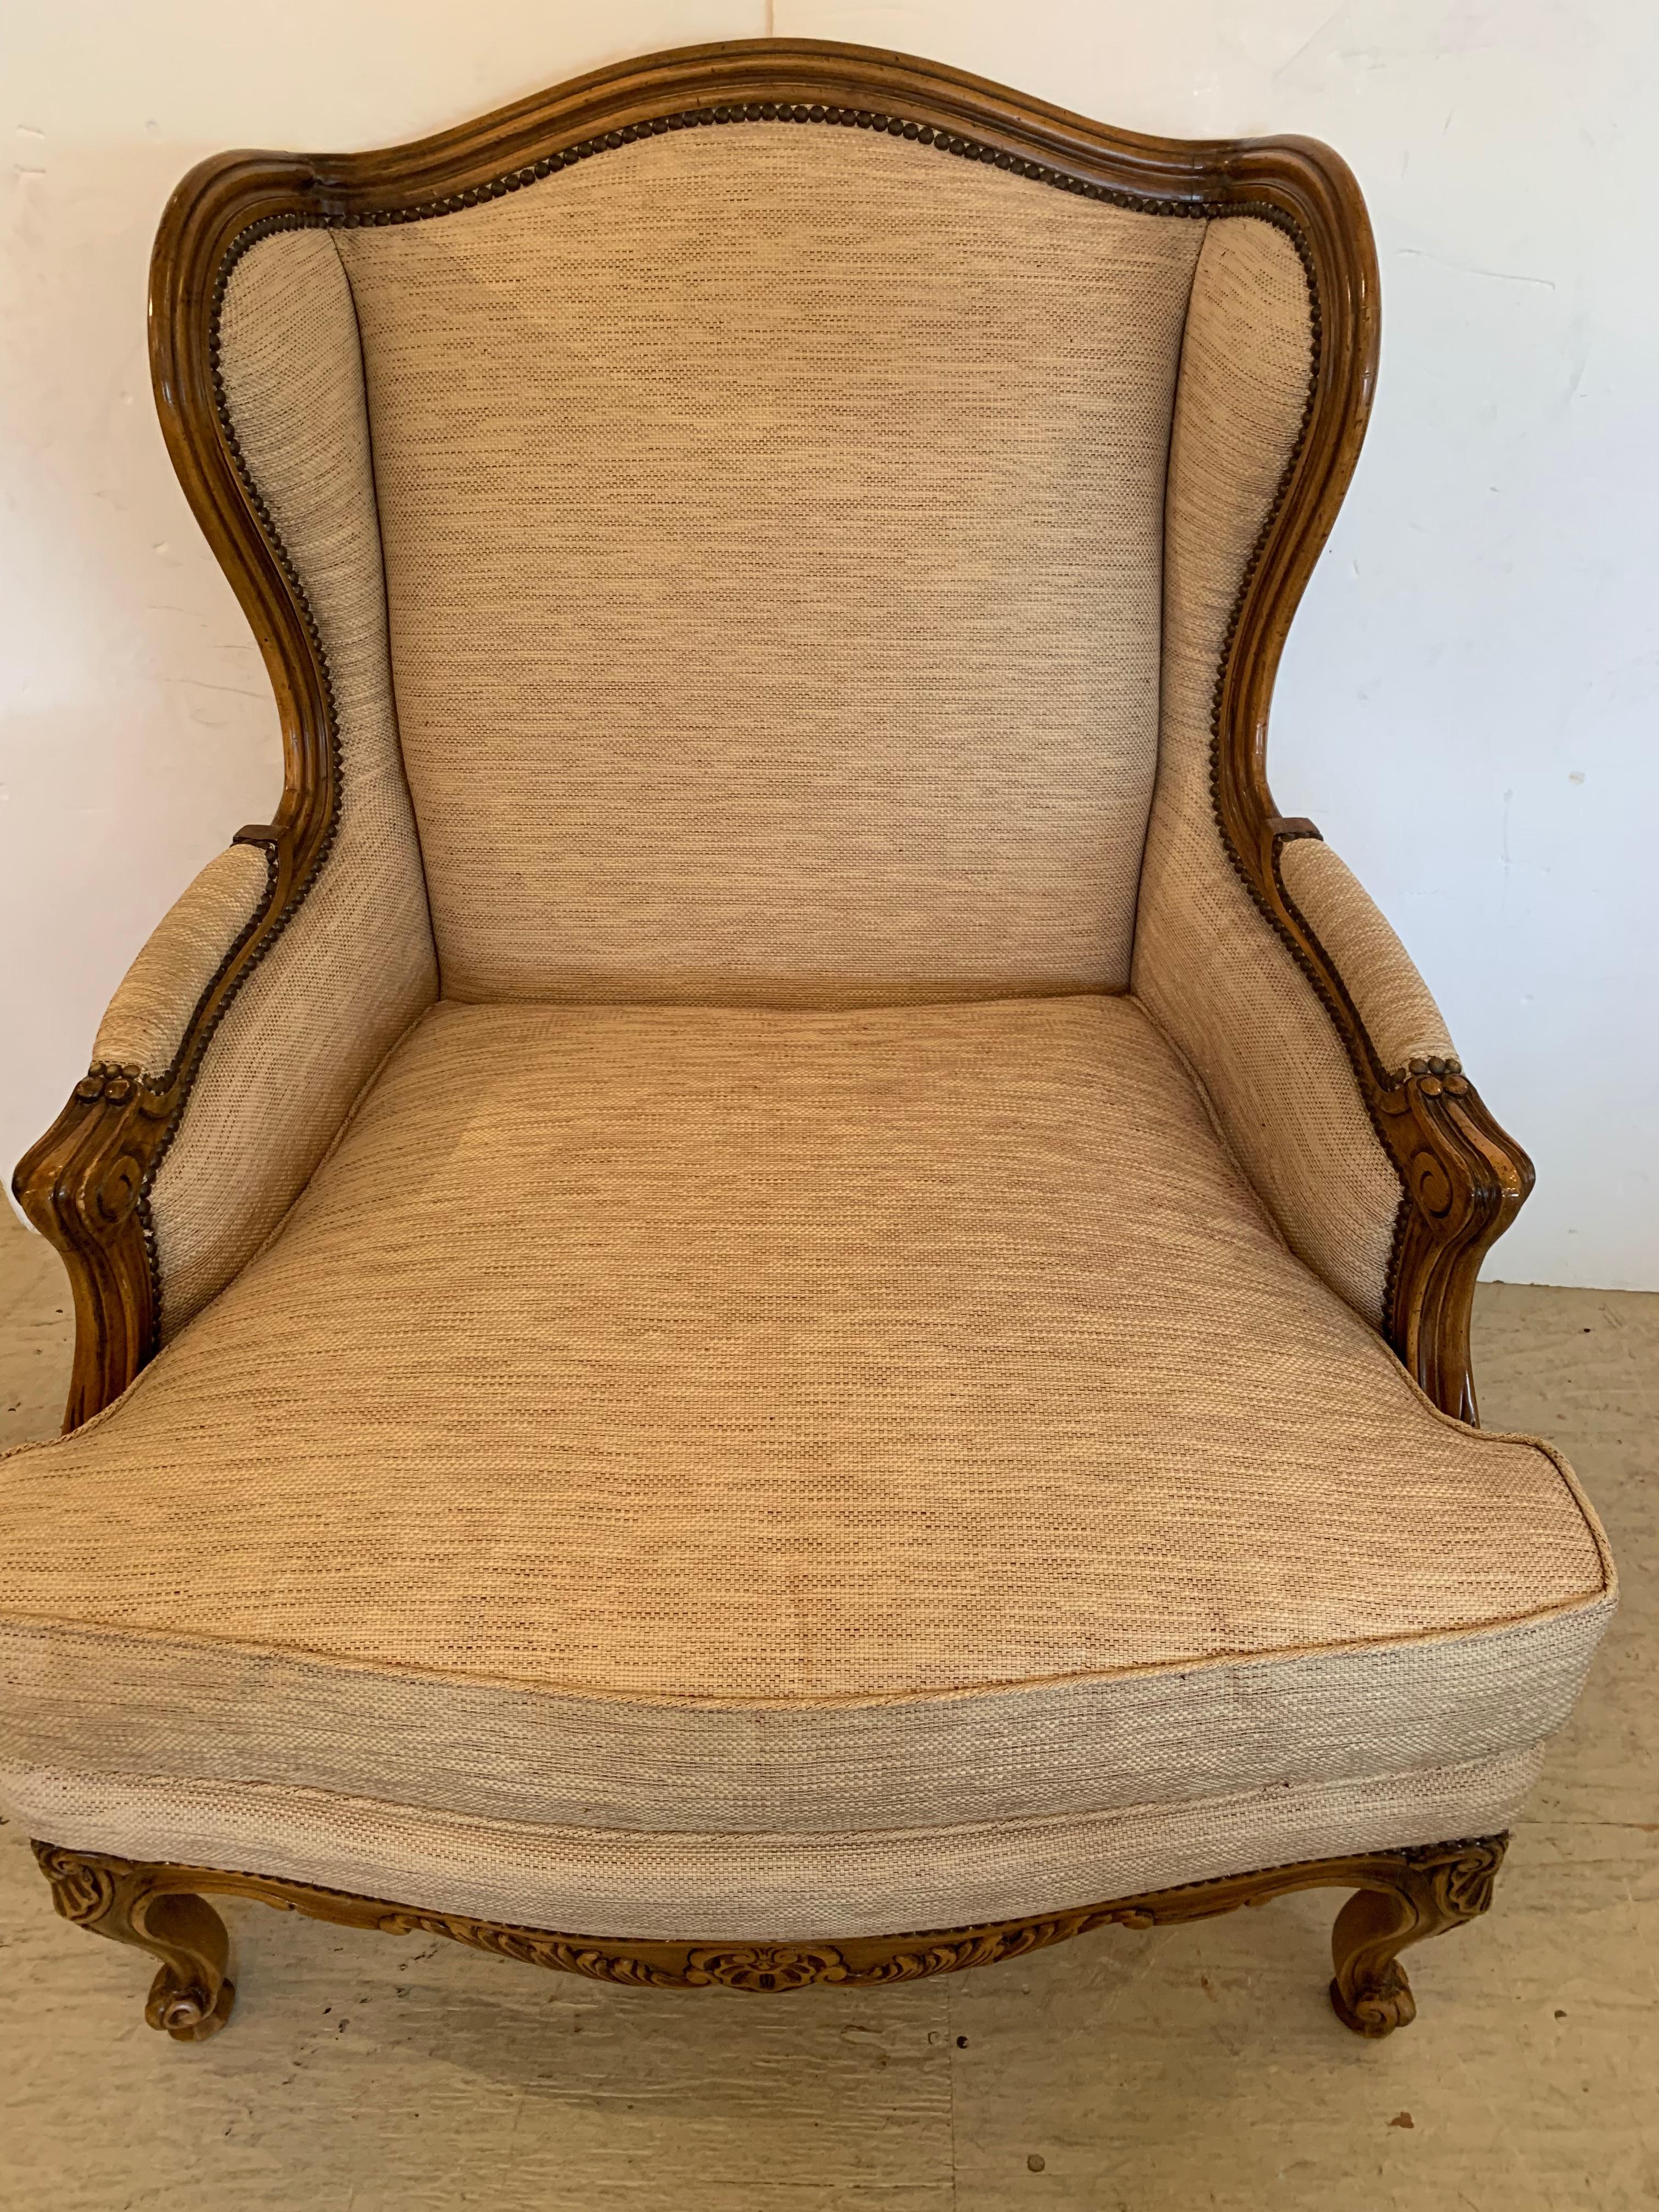 A beautifully made TRS bergere chair inspired by the classic Louis XV bergere form, this quality reproduction armchair has a solid hand carved exposed wooden frame with antique walnut finish and shell motifs and fine cabriole legs. Upholstered in a